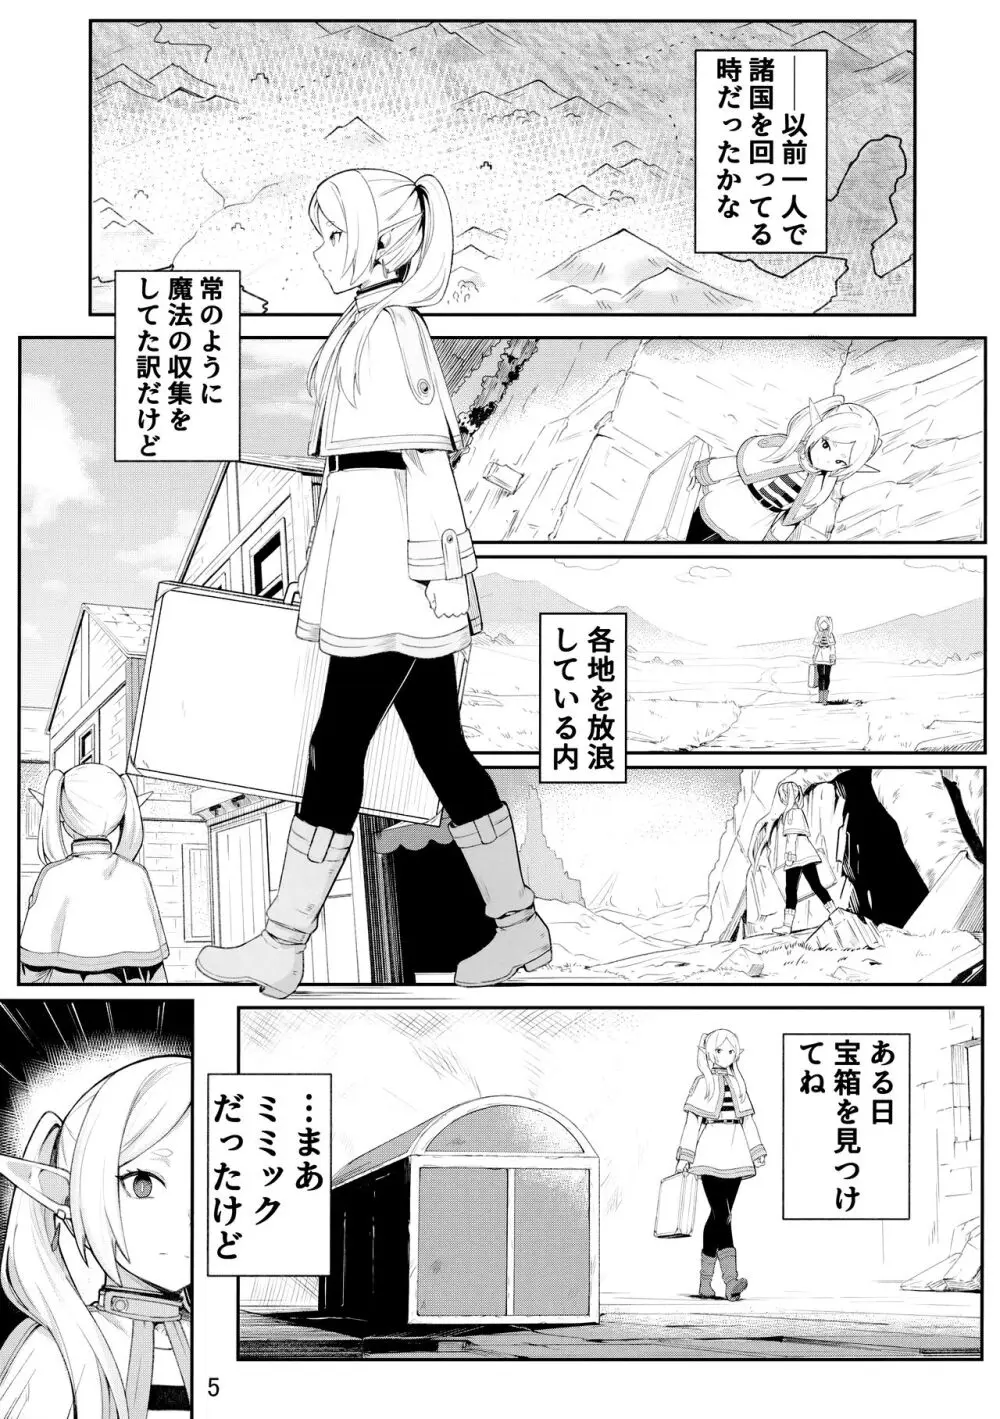 Frieren's ちょっとHな本 - page6